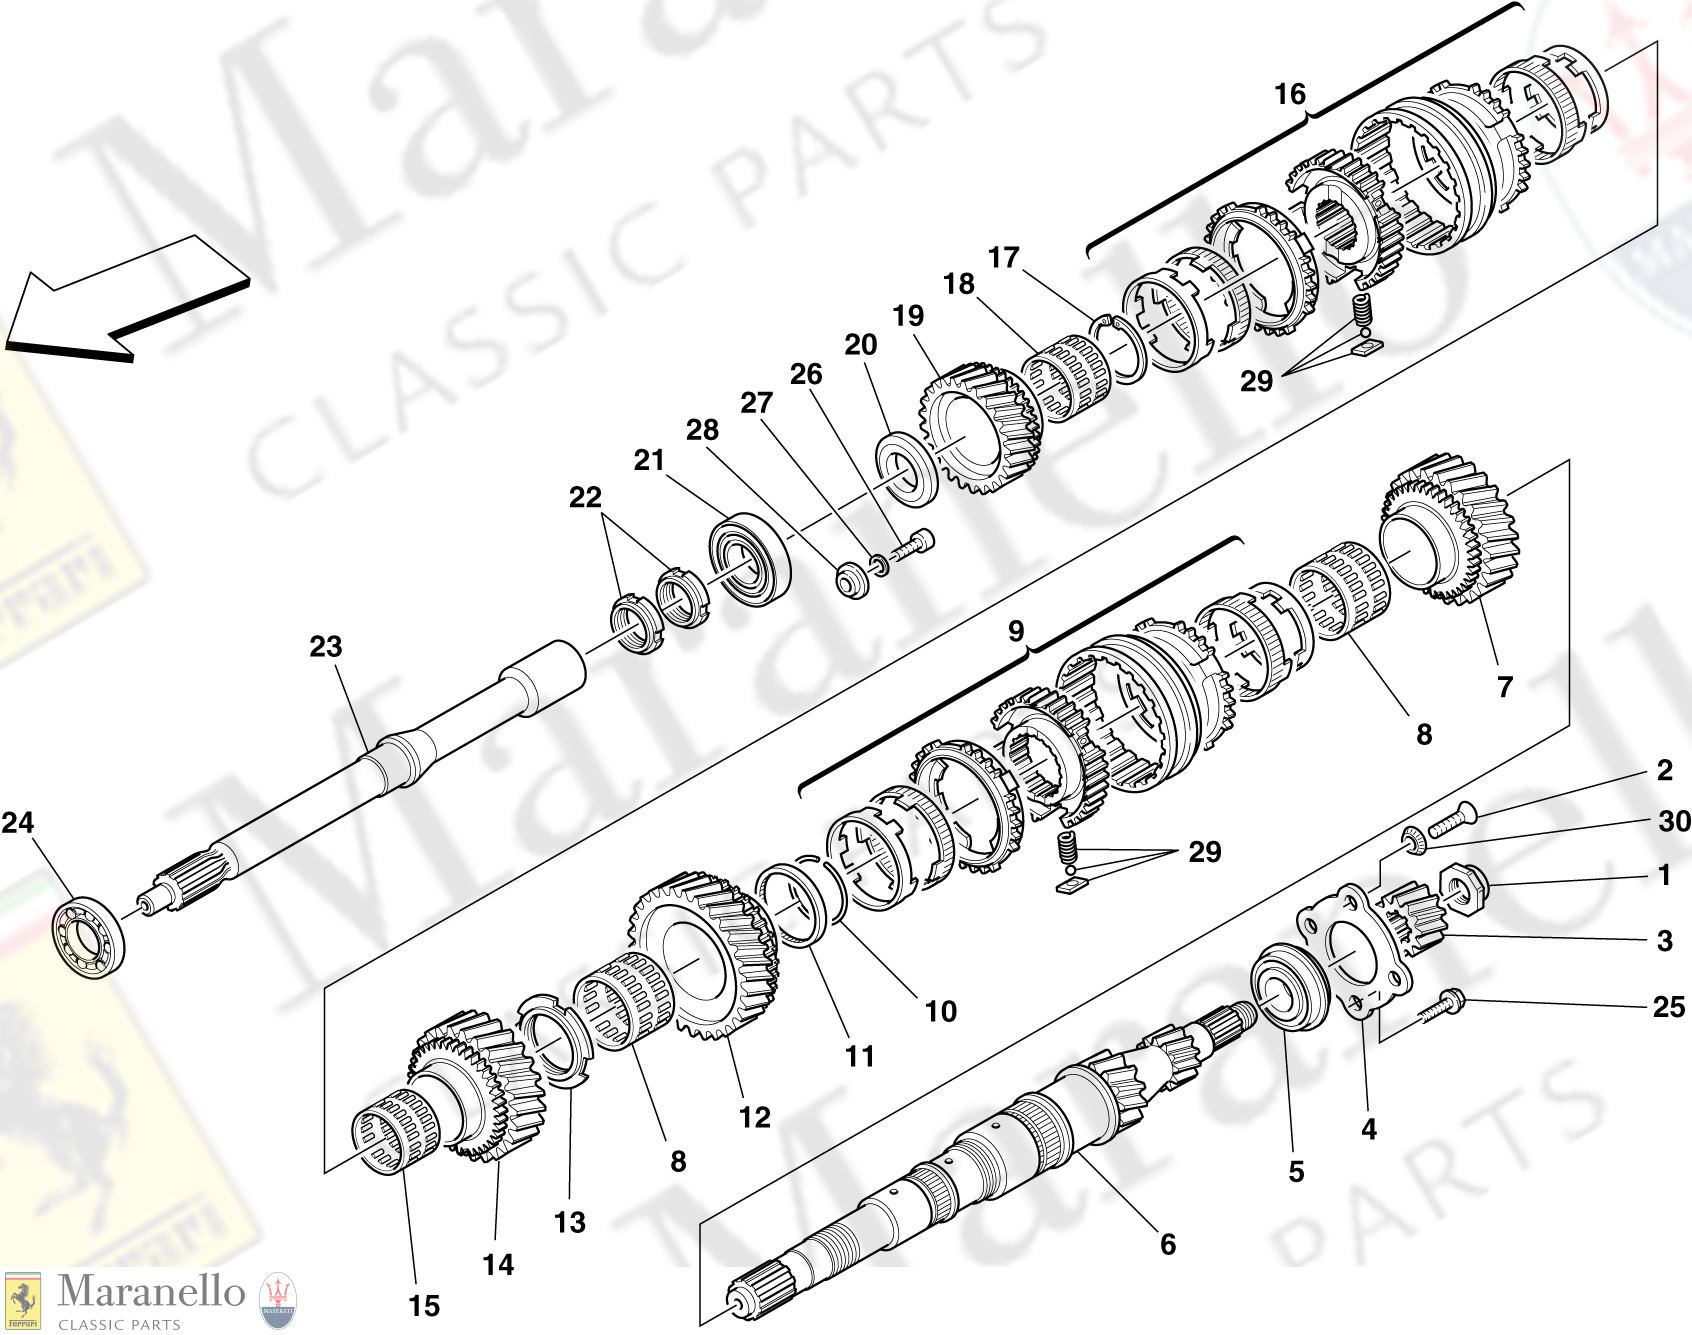 032 - Primary Shaft Gears